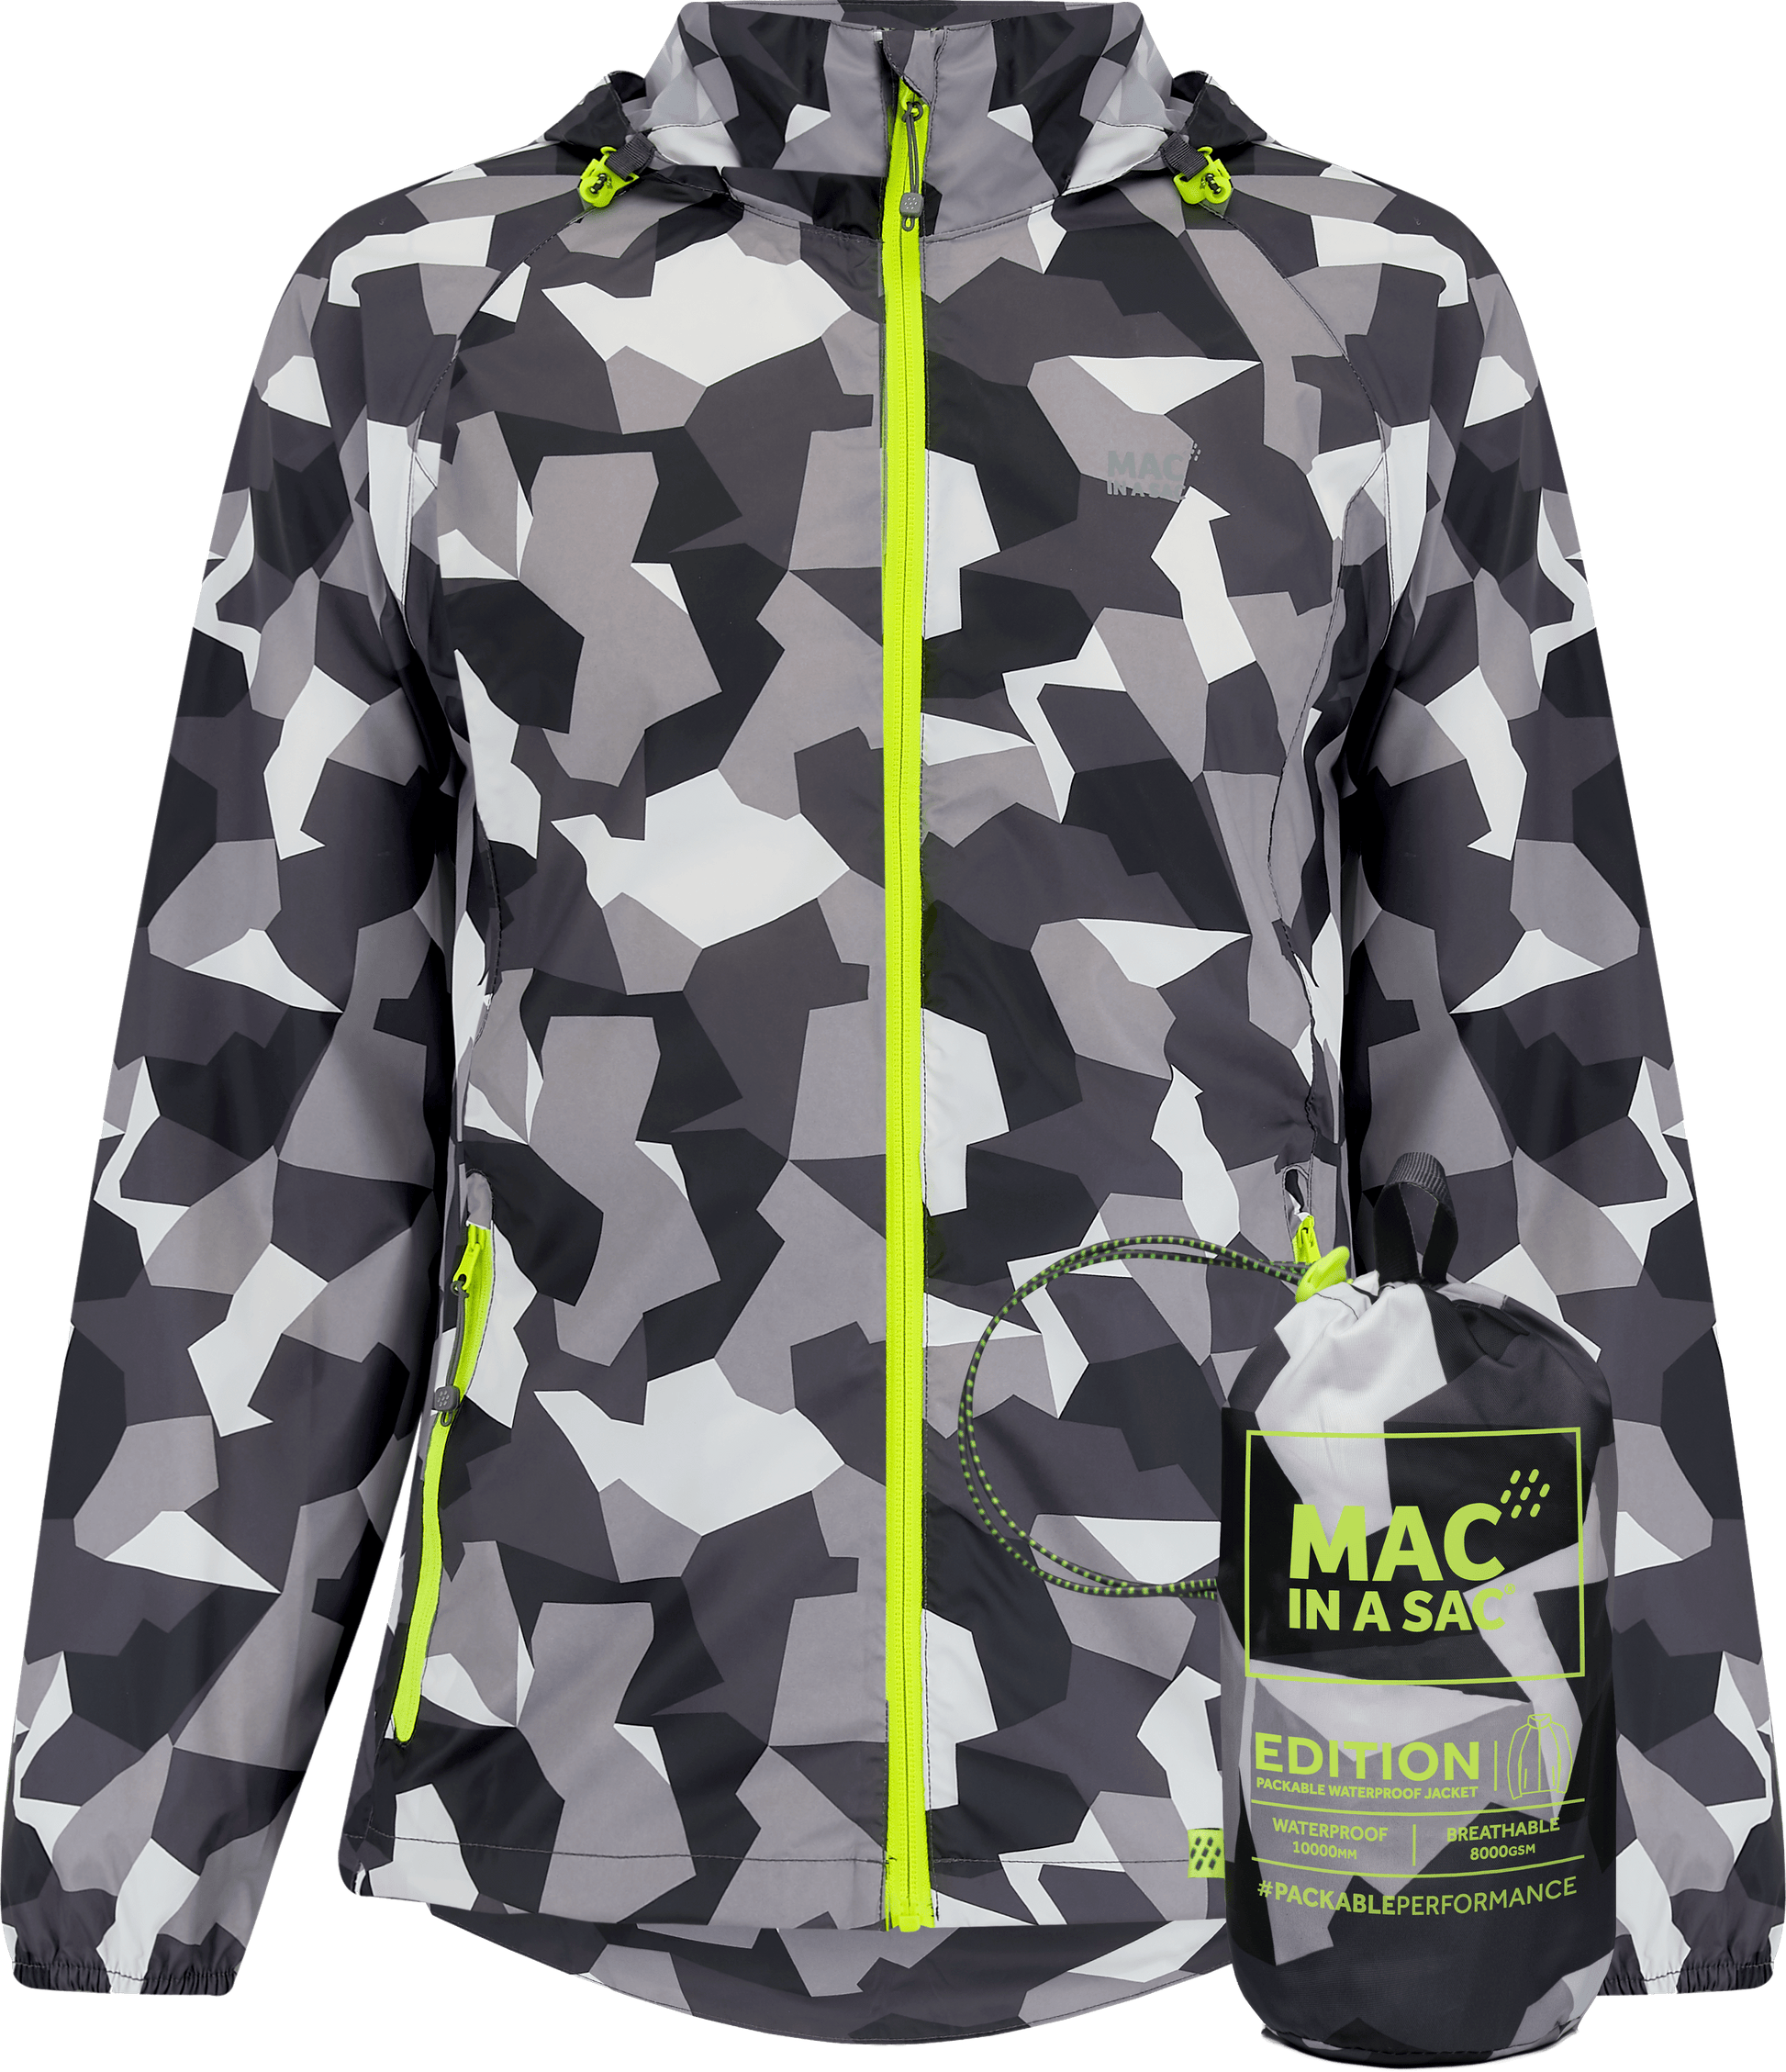 Mac In A Sac Edition 2 Jacket - White